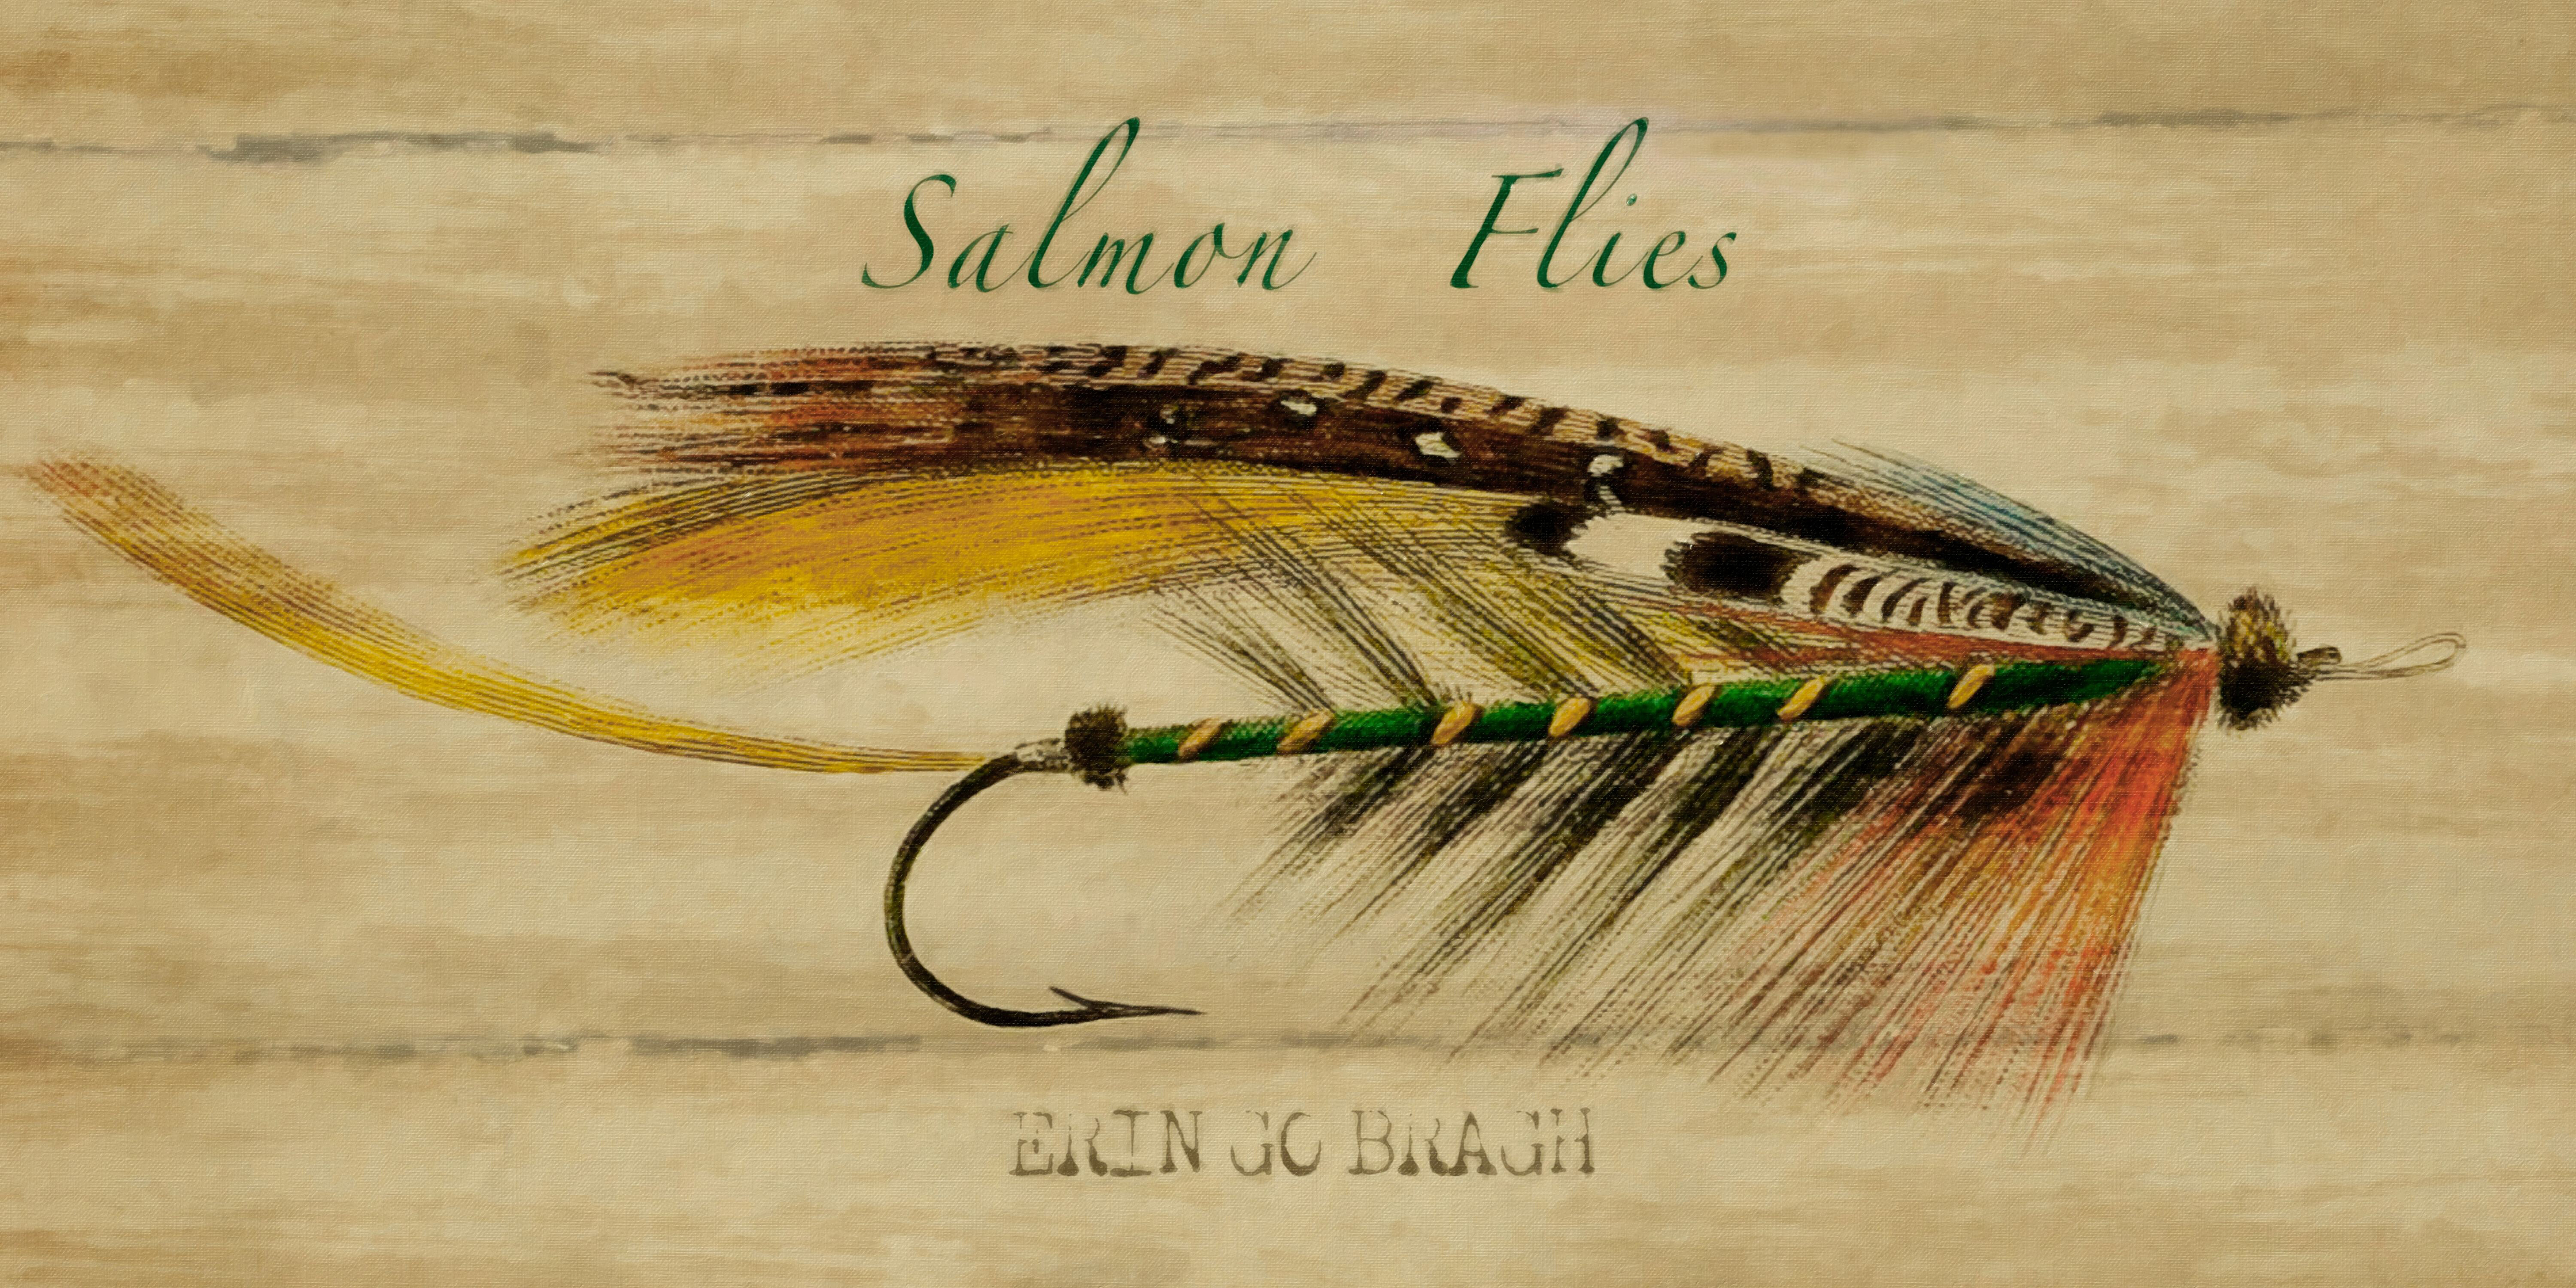 Salmon Fly Fishing - Salmon Flies Art Poster for Sale by